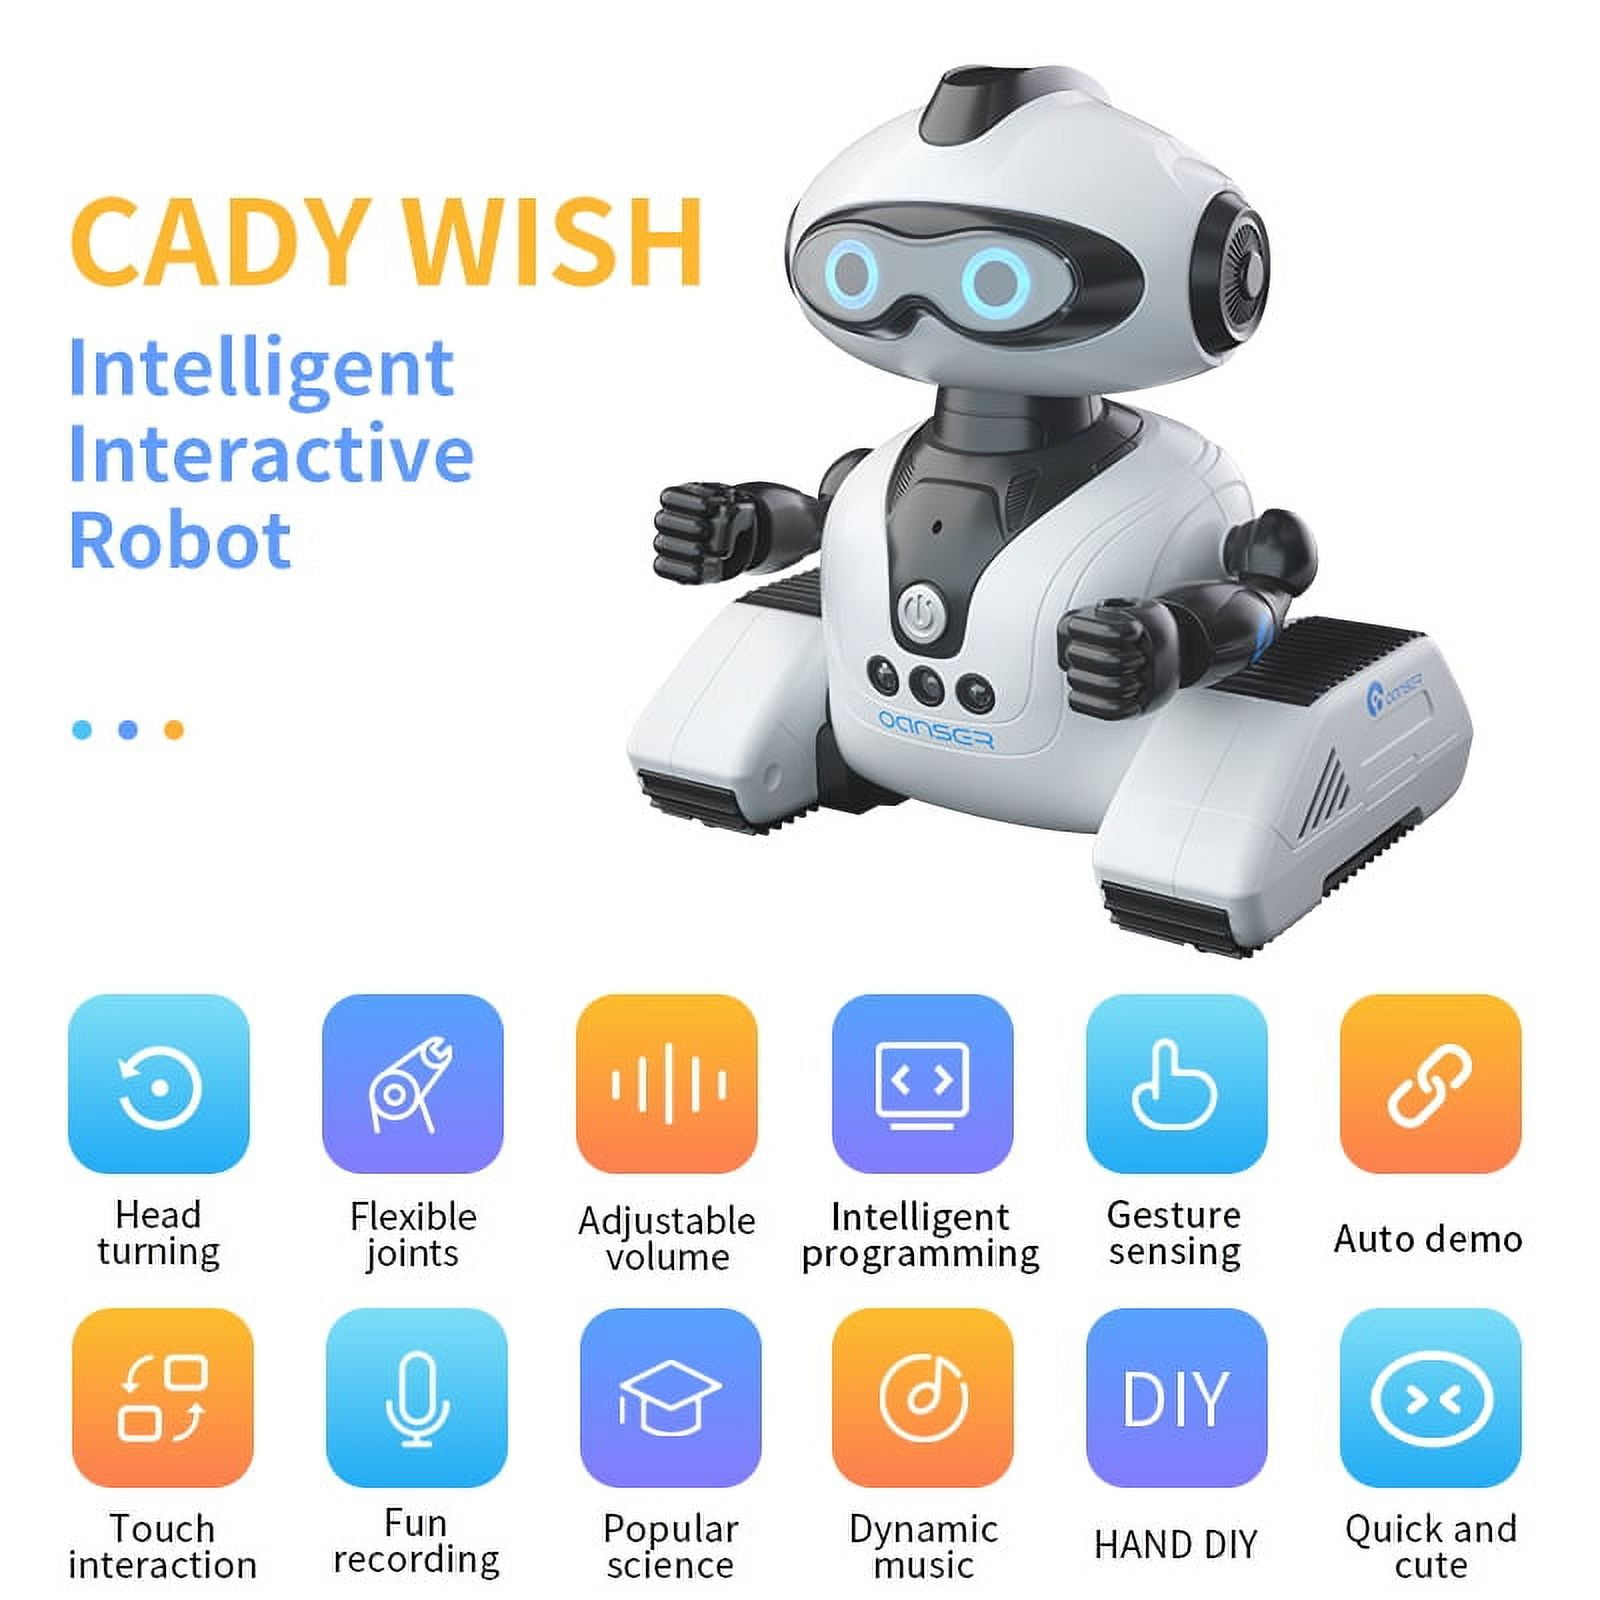  Hamourd Robot Toys for Boys Girls, Rechargeable Remote Control Emo  Robots with Auto-Demonstration, Flexible Head & Arms, Dance Moves, Music,  Shining LED Eyes for 5+ Years Old Kids : Toys 